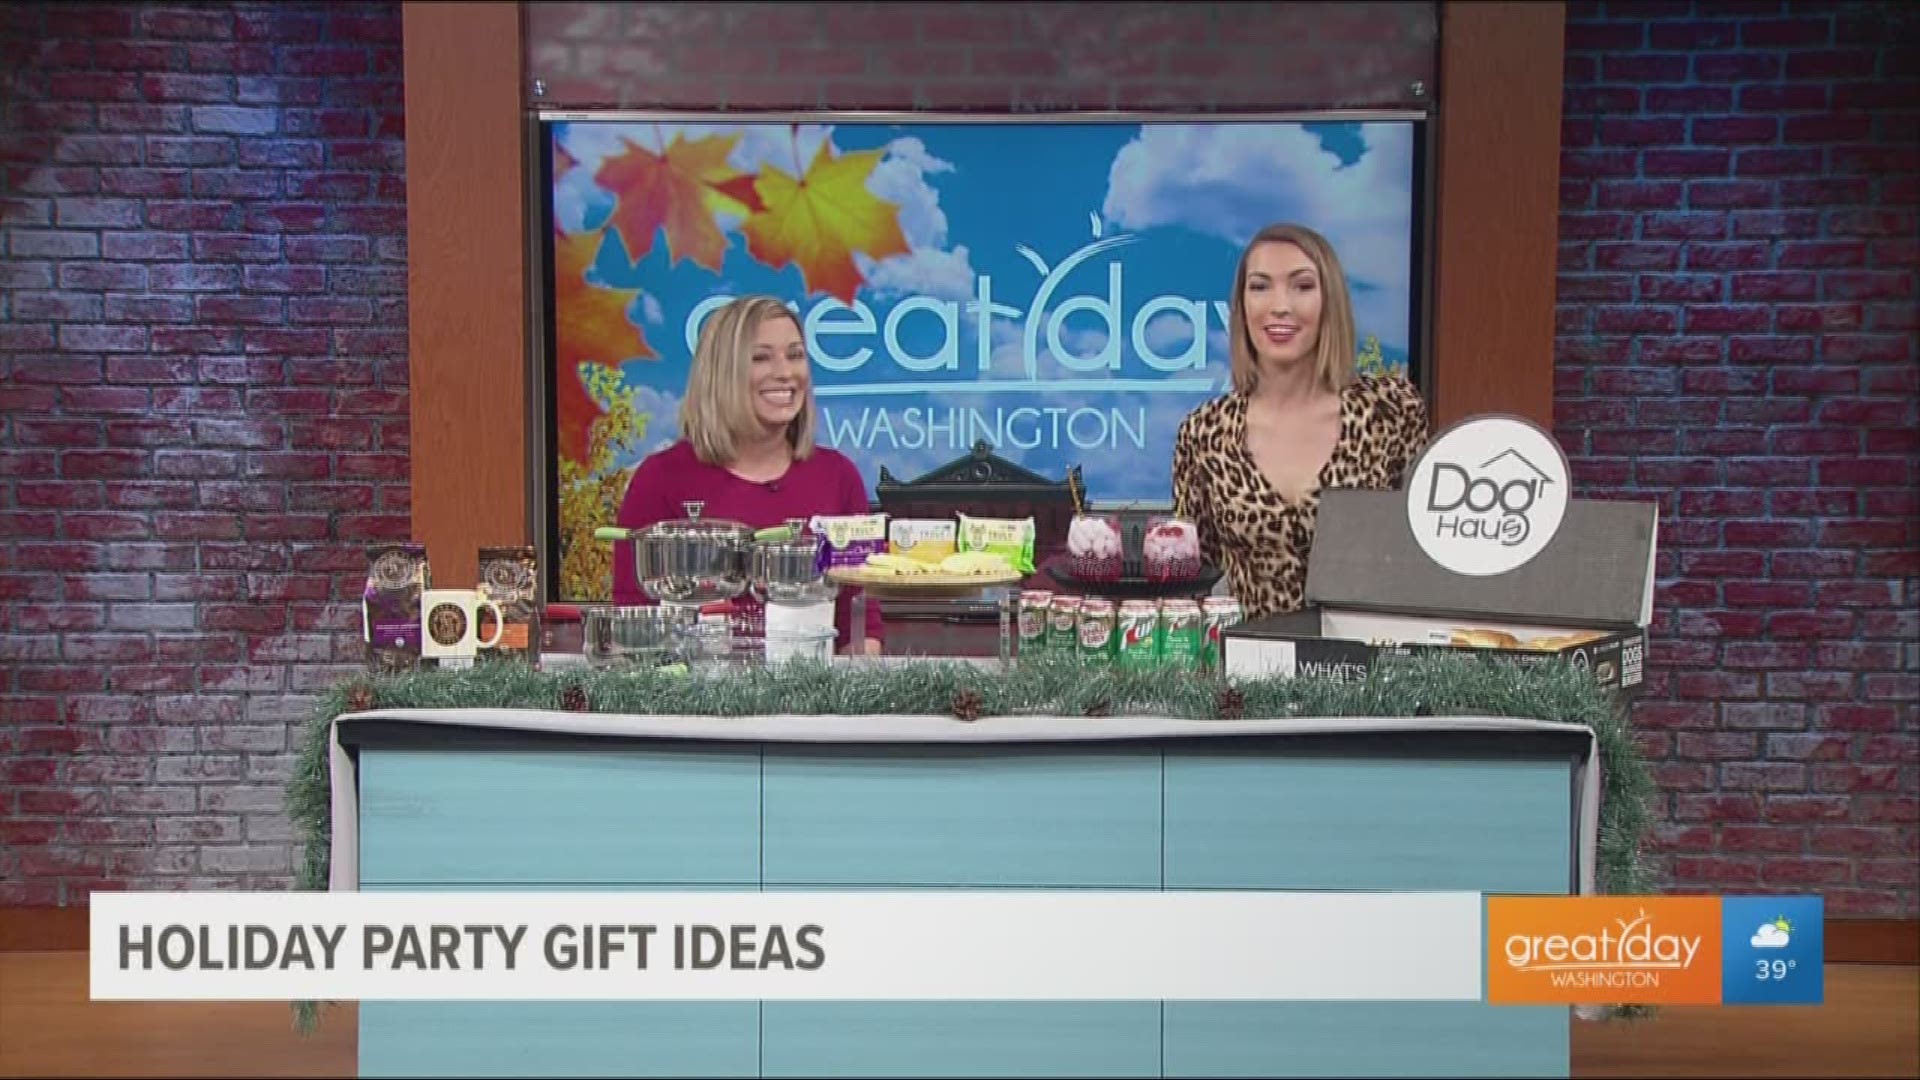 Don't show up to the party empty handed! Lifestyle expert Amanda Mushro share her top holiday party gift ideas!